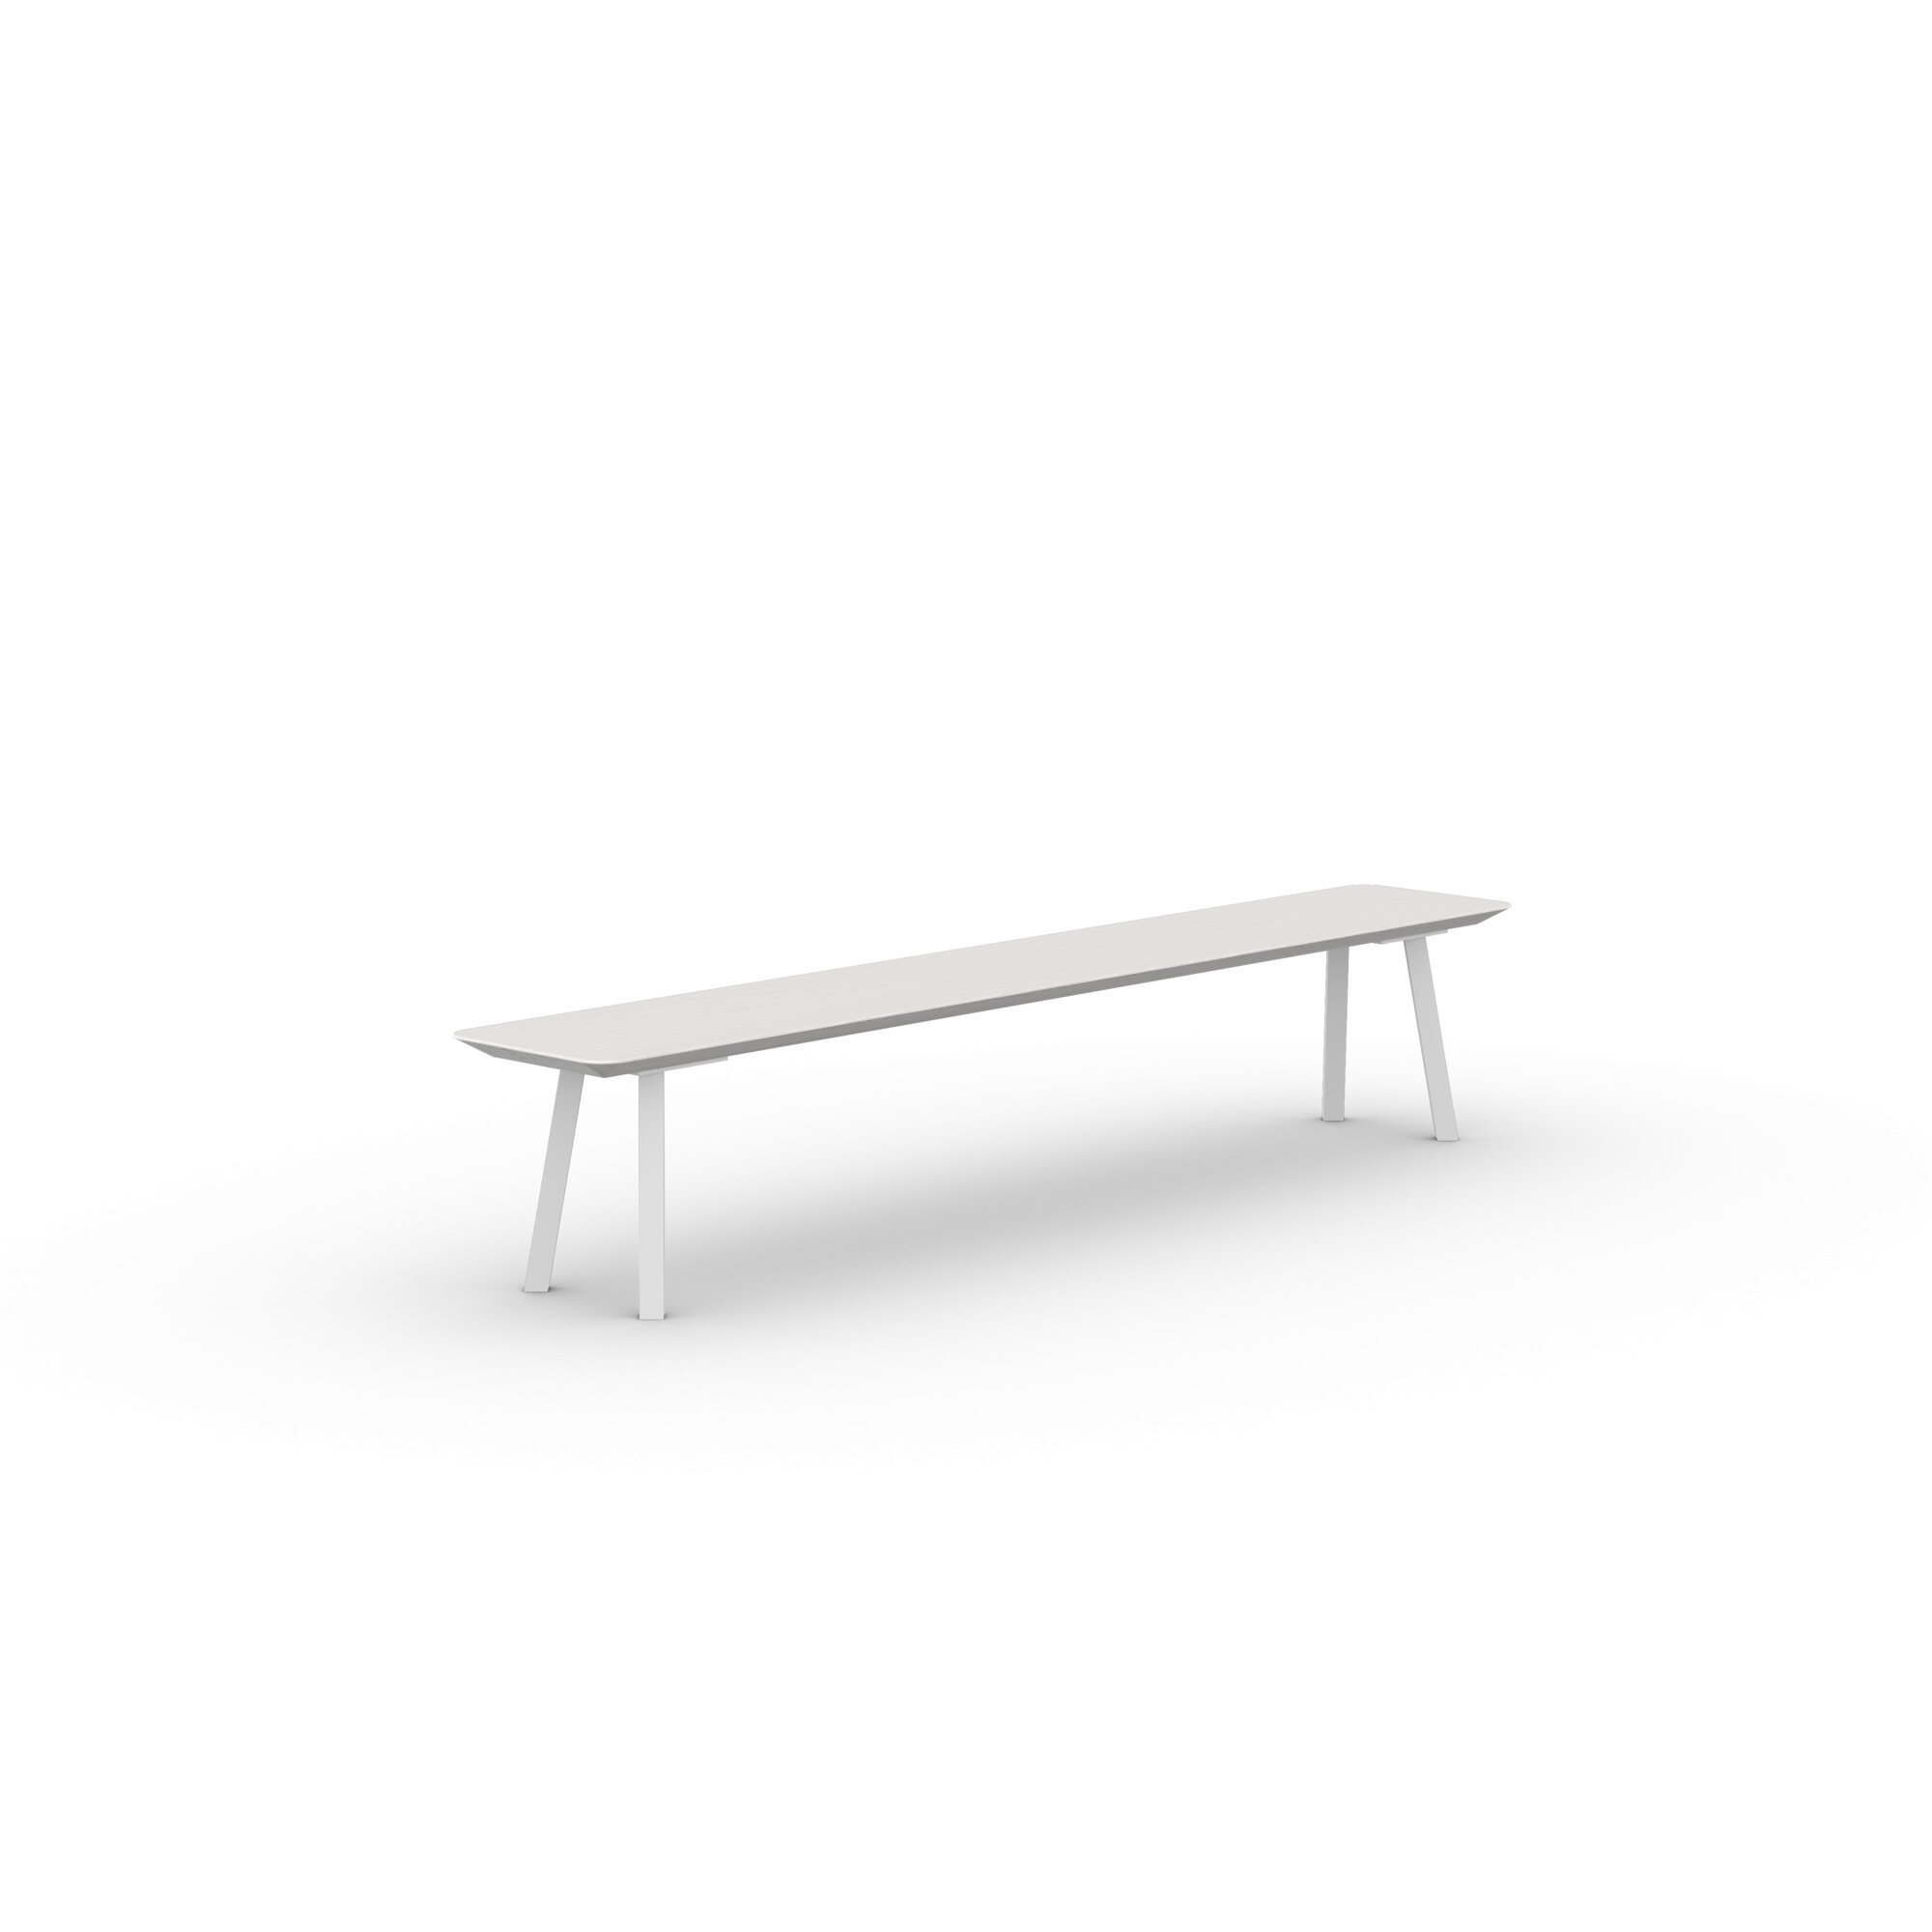 Design Dining Bench | New Classic Bench Steel white powdercoating | Oak white lacquer | Studio HENK| 